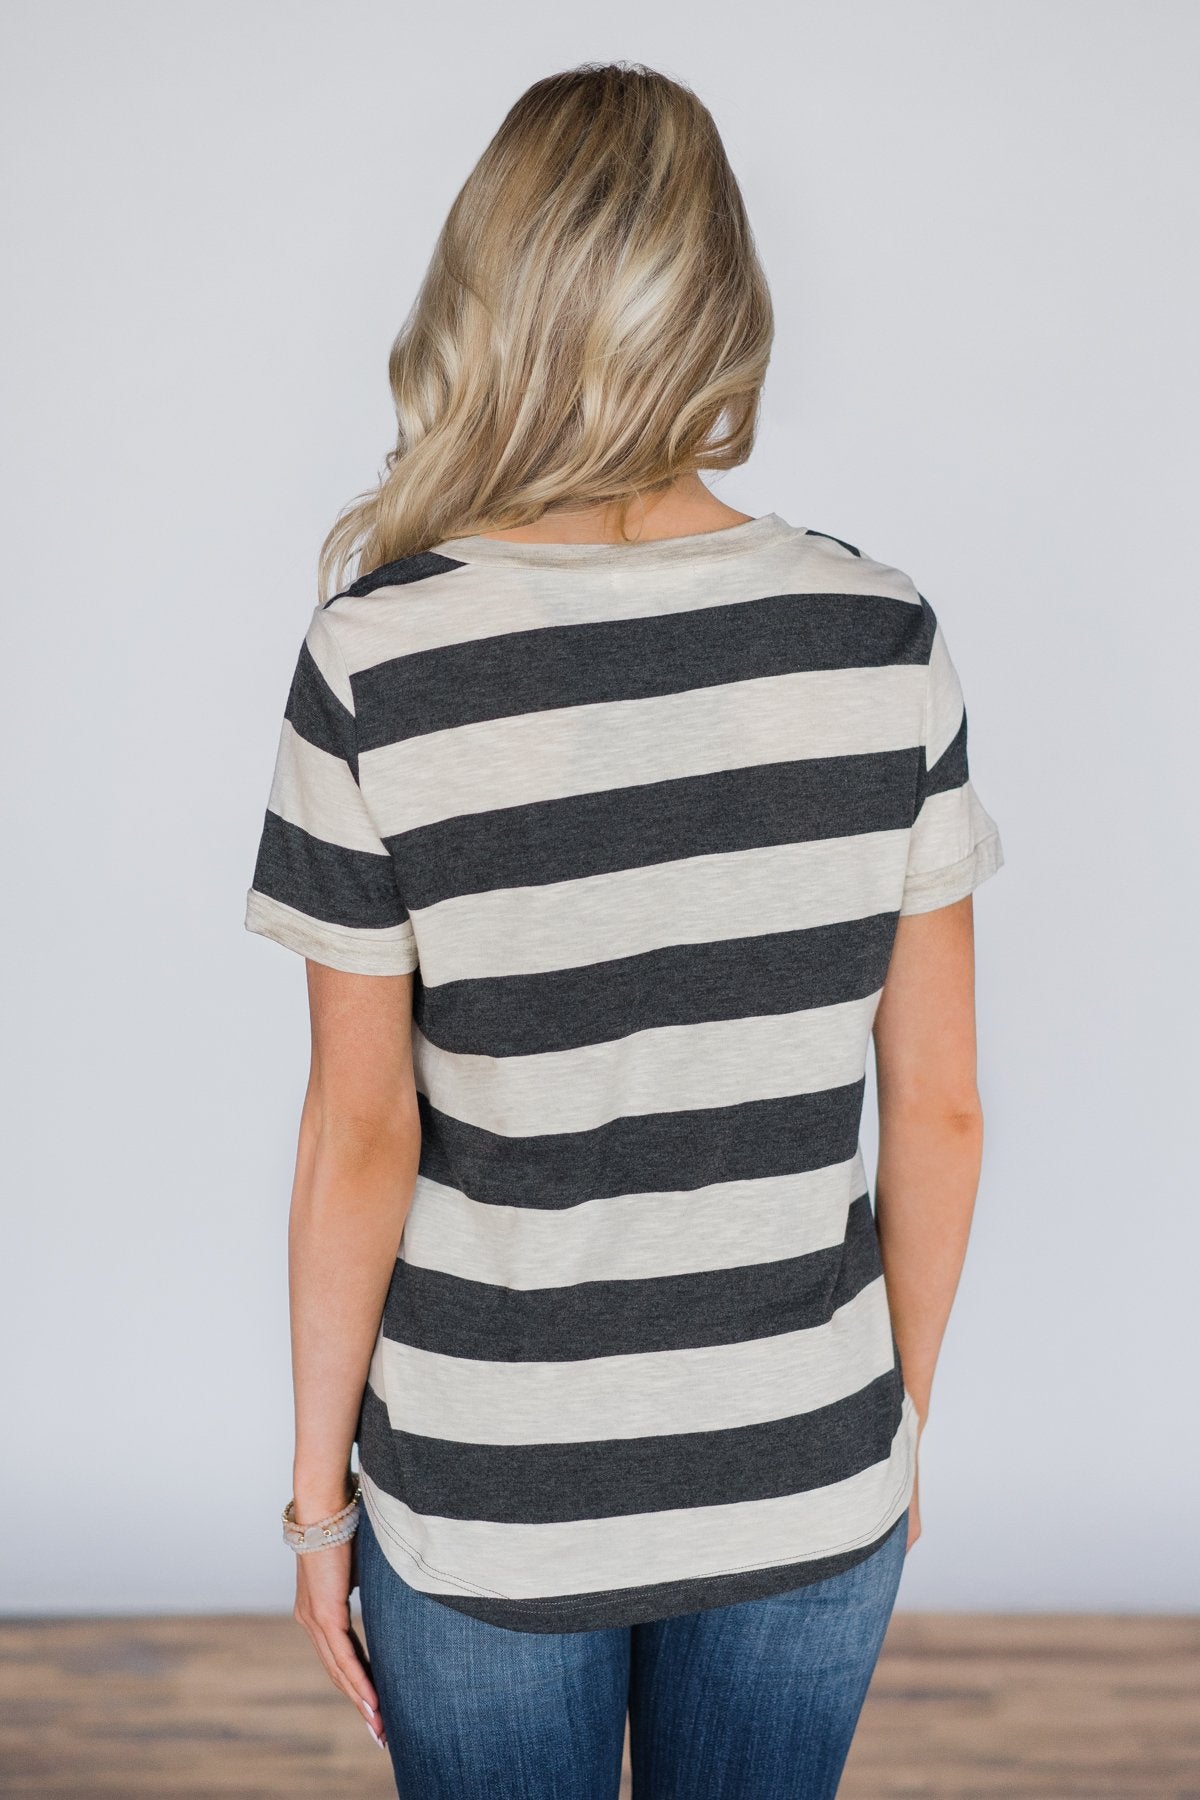 A Fine Time Striped Top ~ Charcoal